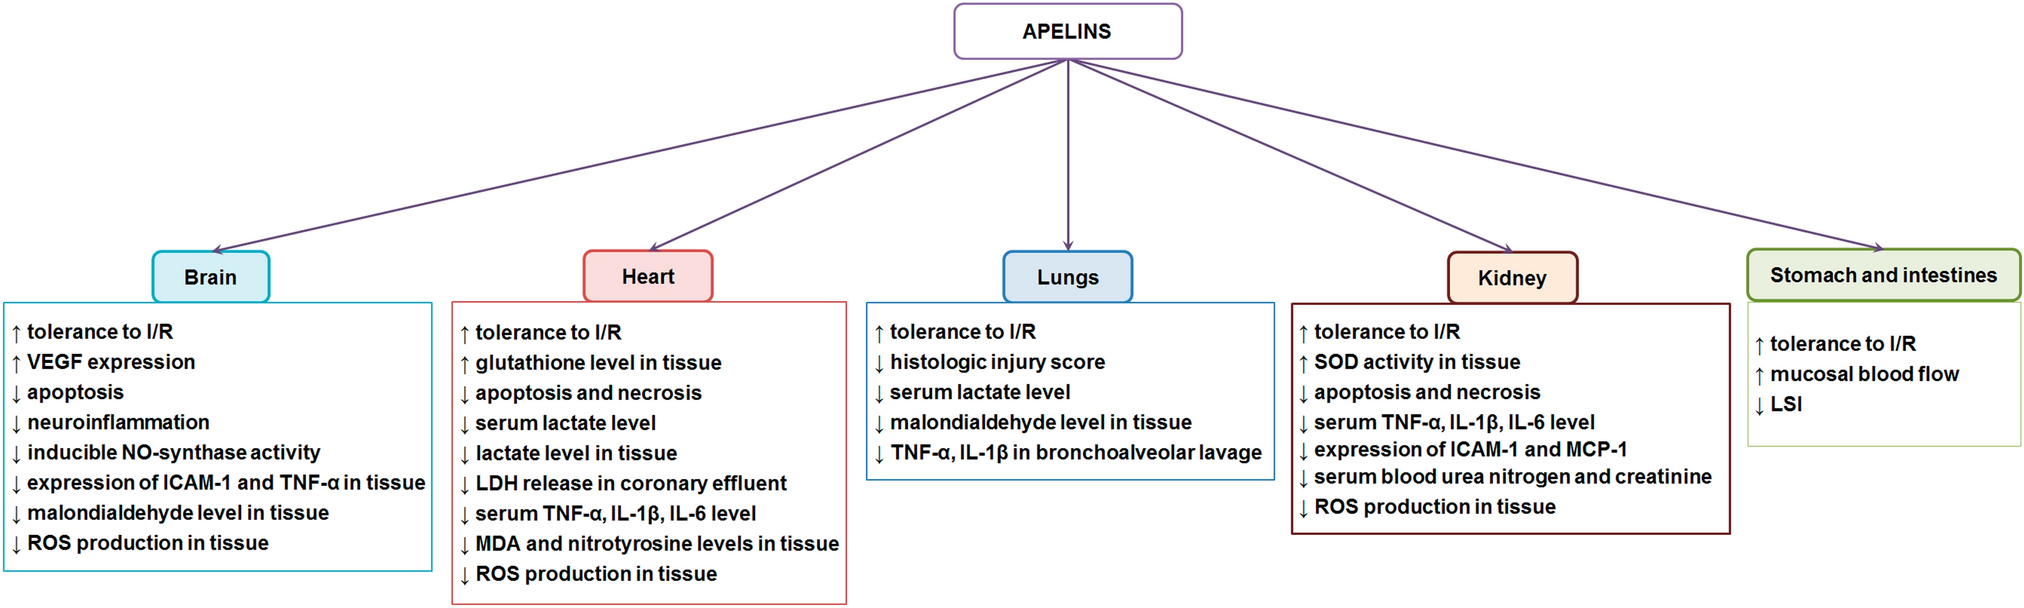 Apelin is Peptide Increasing Tolerance of Organs and Cells to Hypoxia and Reoxygenation. The Signaling Mechanism